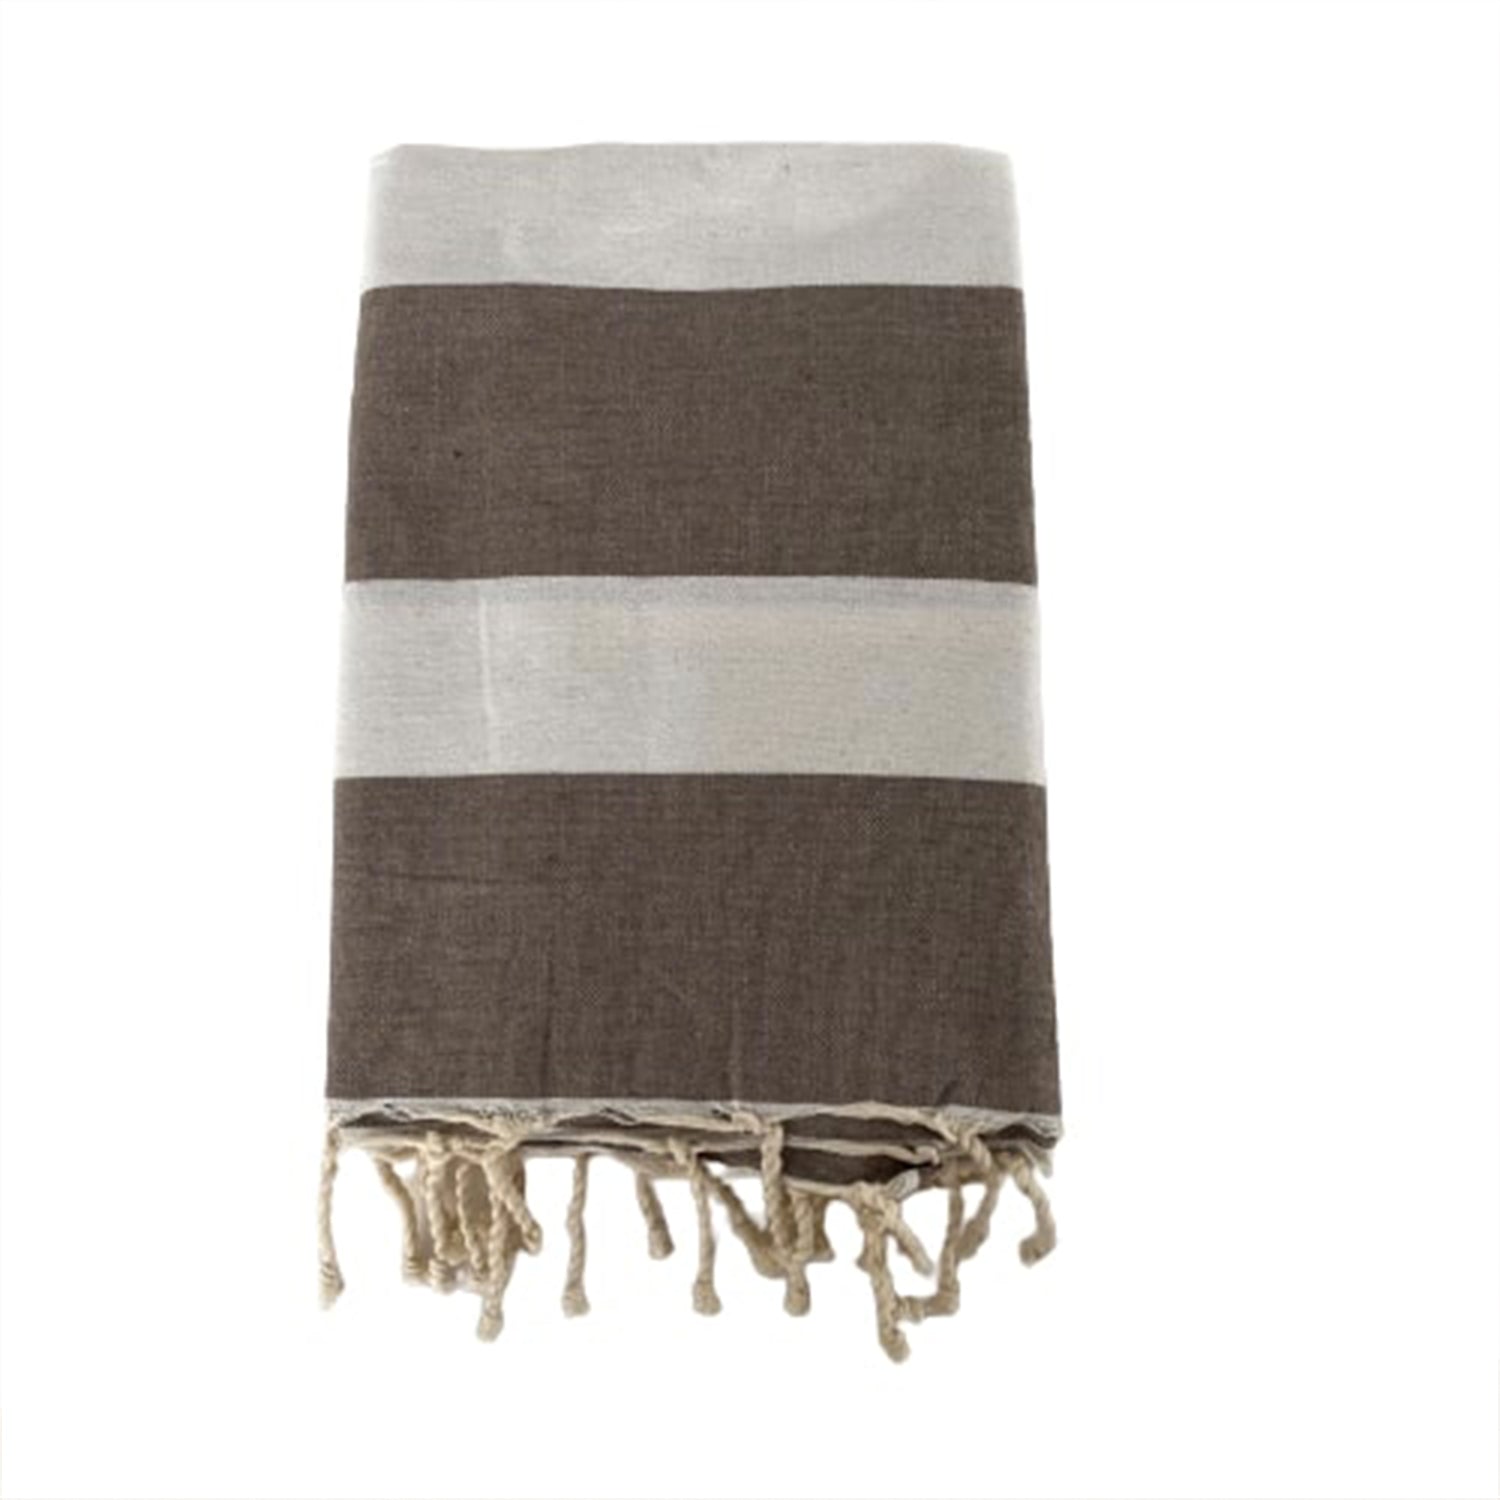 Fouta traditionnelle Transat taupe 100x200 190g/m²